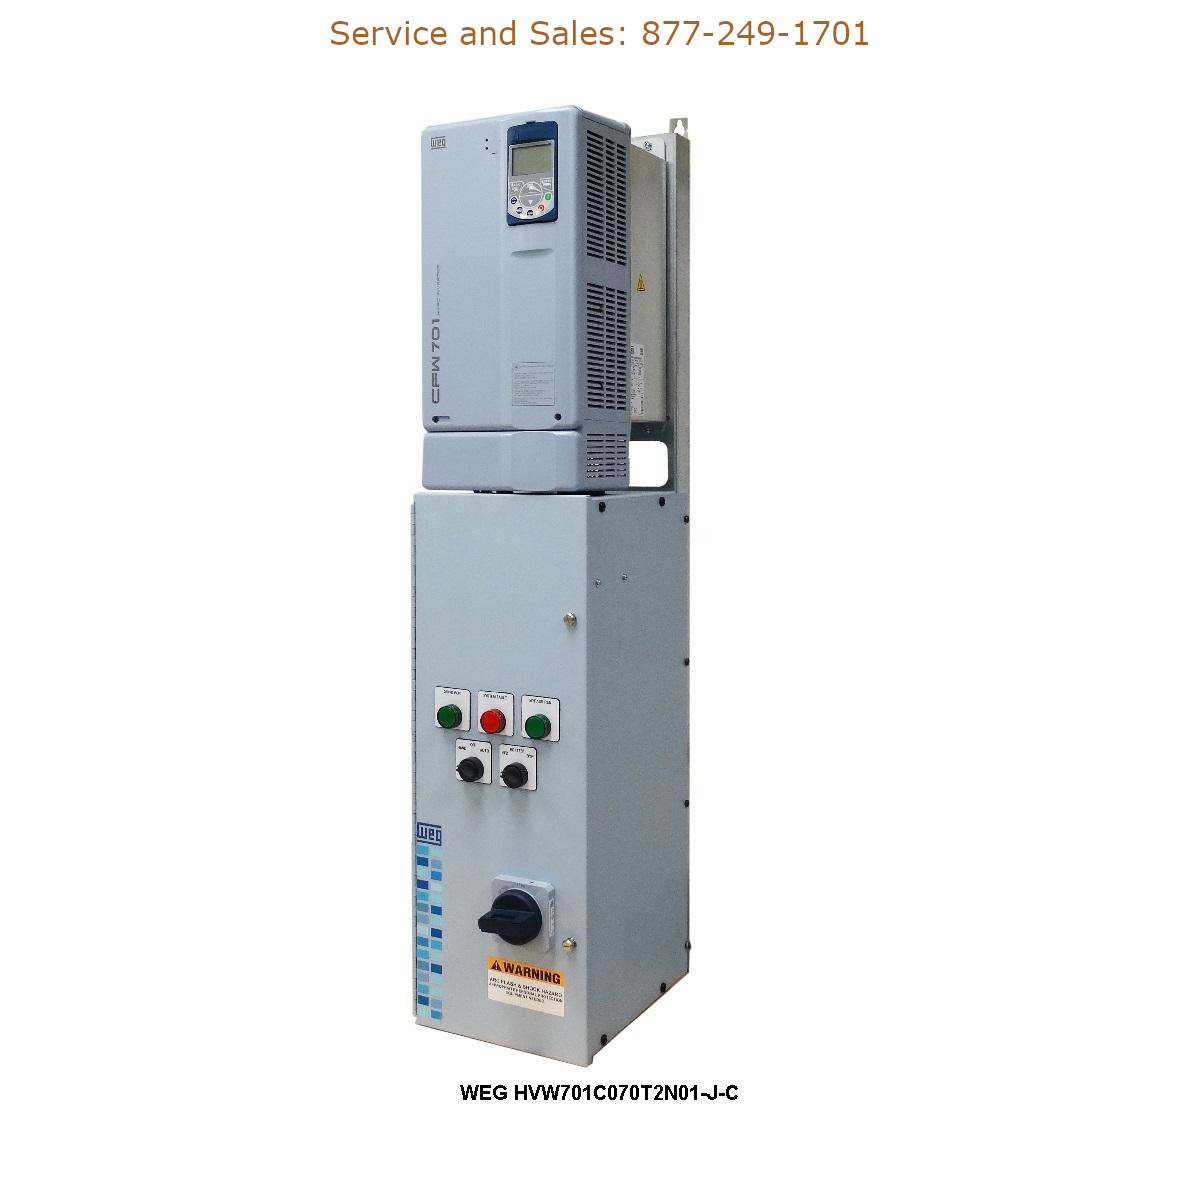 WEG HVW701C070T2N01-J-C WEG Model Number HVW701C070T2N01-J-C WEG Drives, Variable Speed Drives Repair Service, Troubleshooting, Replacement Parts https://gesrepair.com/wp-content/uploads/2022/WEG/WEG_HVW701C070T2N01-J-C_Drives_Variable_Speed_Drives.jpg